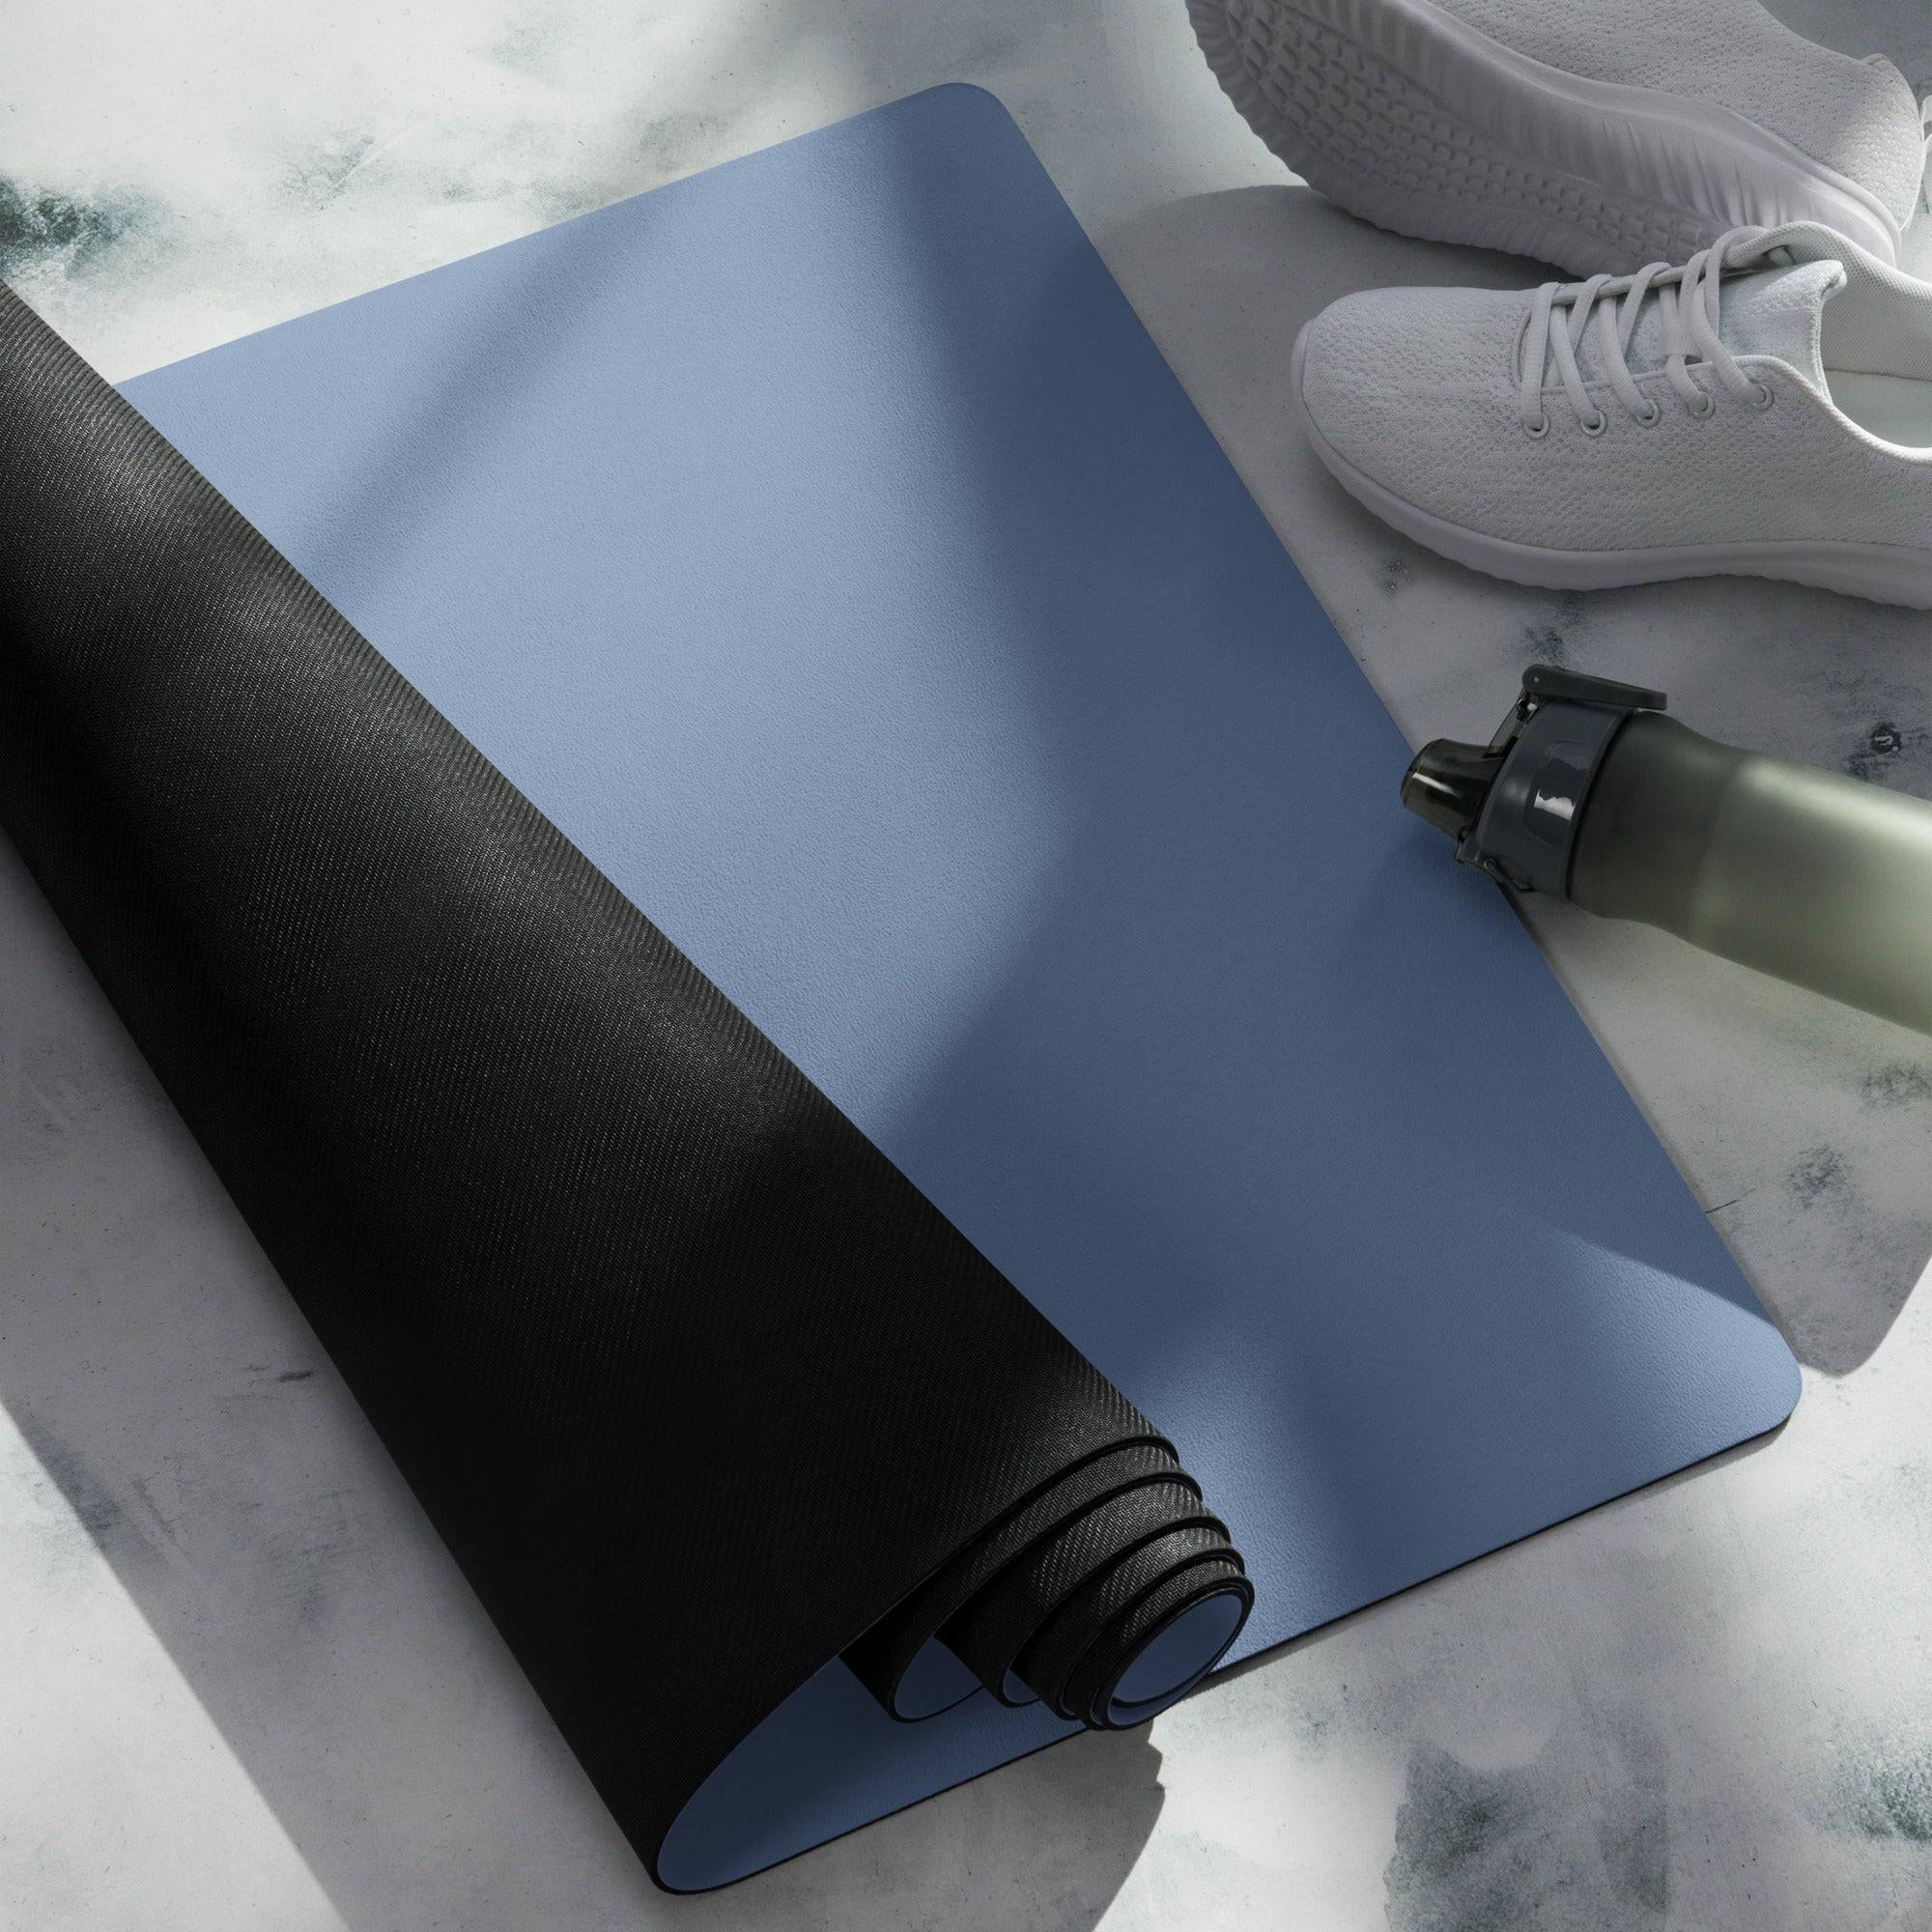 Yoga Mat Blue Serenity Calming Zen Design - Revive Wear     Yoga Mat Blue Serenity. Our anti-slip Revive Wear Yoga Mat is hand-made and offers superb cushioning and support, with a convenient carry handle. Shop with free shipping.